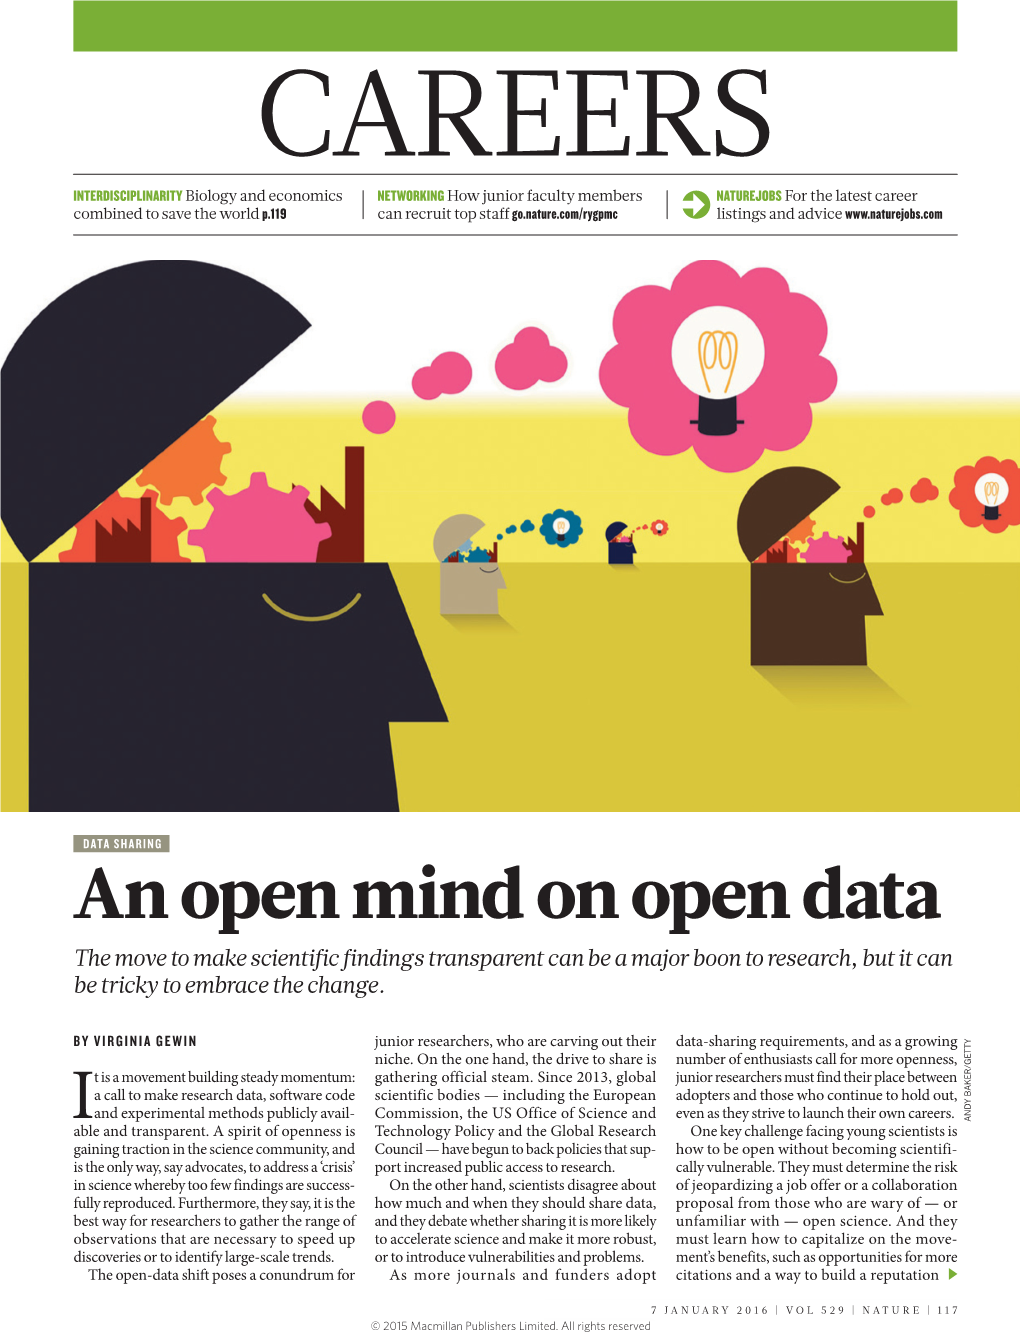 An Open Mind on Open Data the Move to Make Scientific Findings Transparent Can Be a Major Boon to Research, but It Can Be Tricky to Embrace the Change